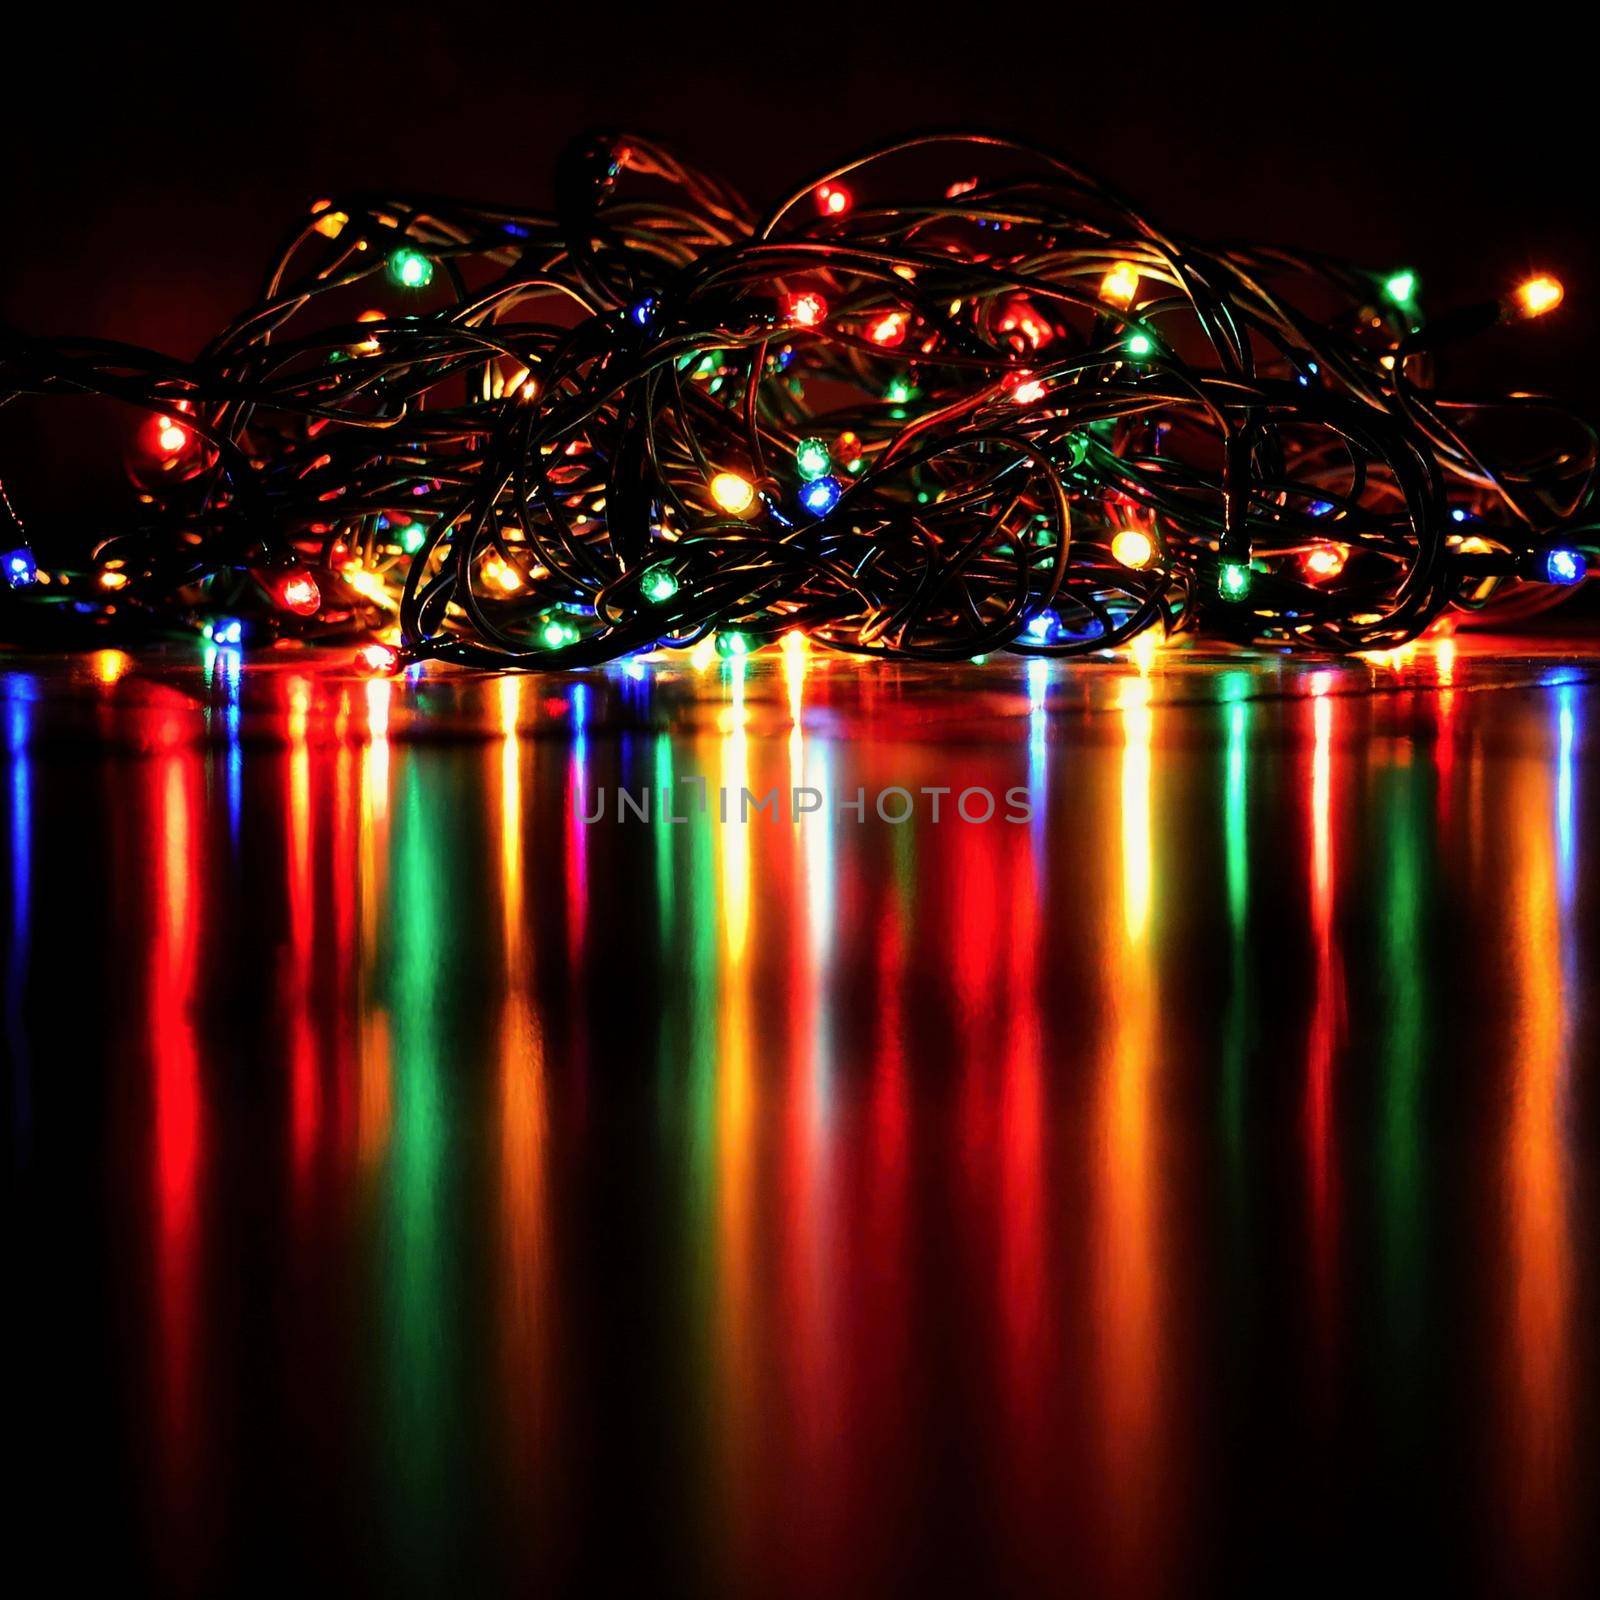 Christmas lights on black background with copy space. Colored reflecting surface. by Montypeter